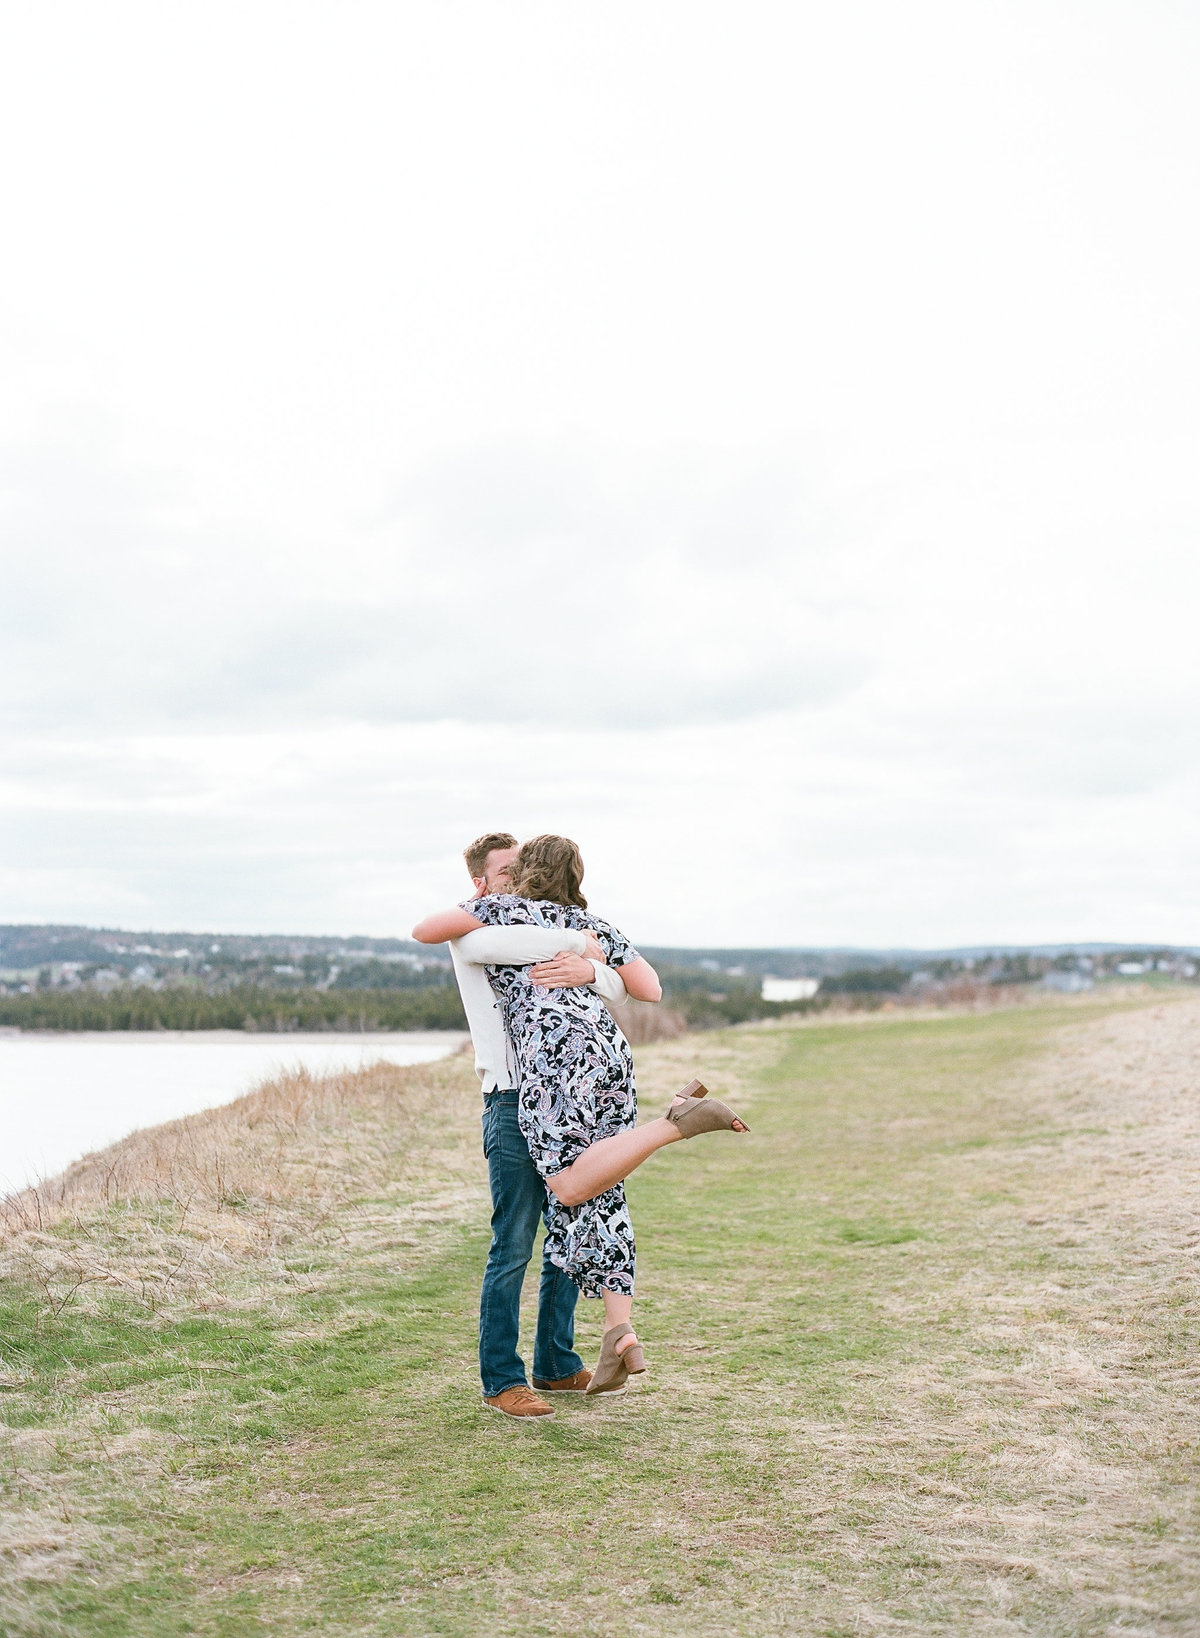 Jacqueline Anne Photography - Akayla and Andrew - Lawrencetown Beach-54